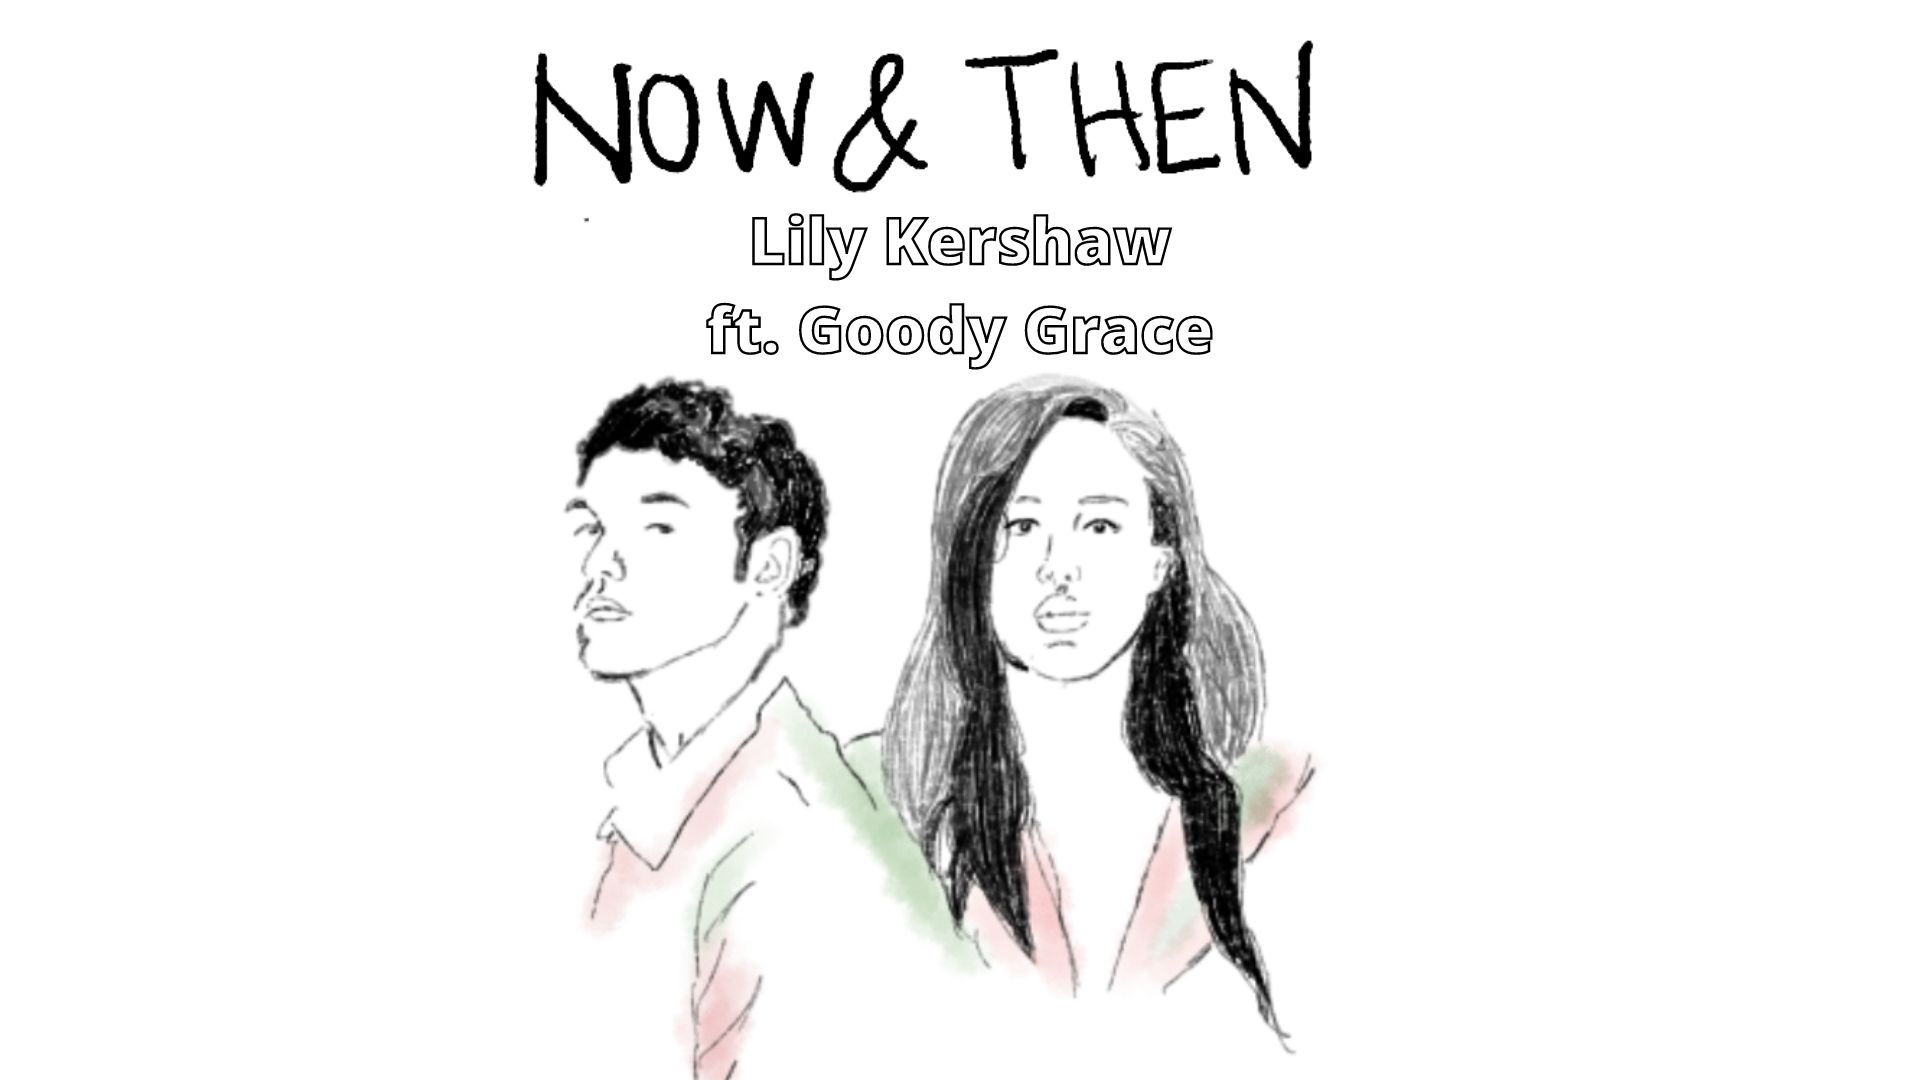 now and then - lily kershaw - goody grace - indie - indie music - indie pop - new music - music blog - USA - wolf in a suit - wolfinasuit - wolf in a suit blog - wolf in a suit music blog